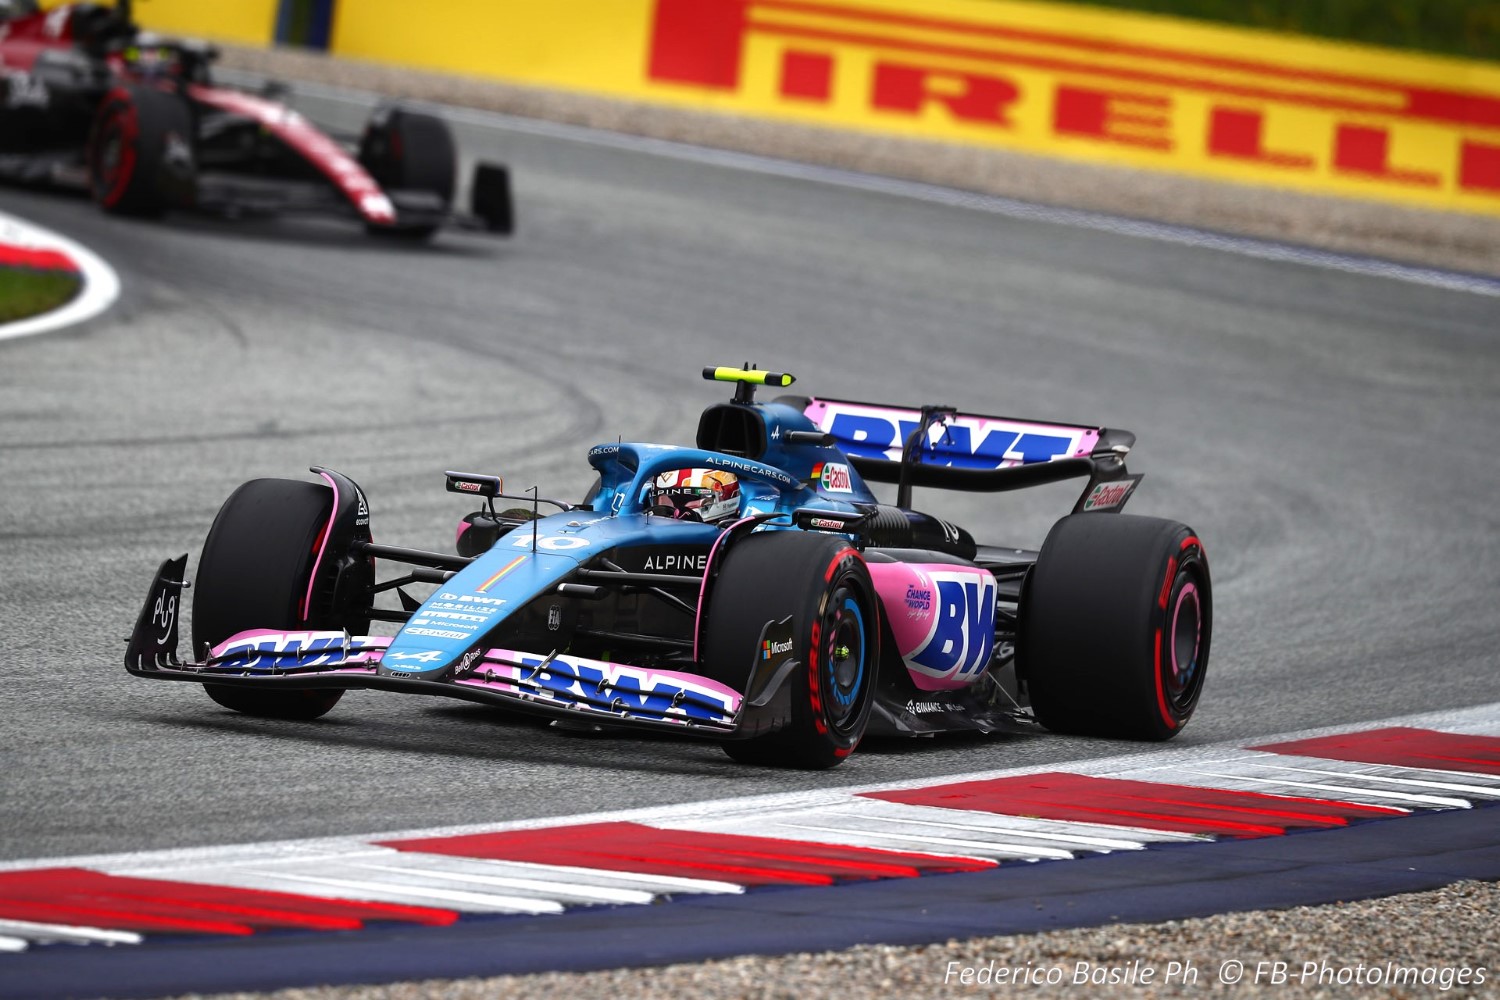 #10 Pierre Gasly, (FRA) Alpine F1 Team during the Austrian GP, Spielberg 29 June-2 July 2023 at the RedBull Ring, Formula 1 World championship 2023.